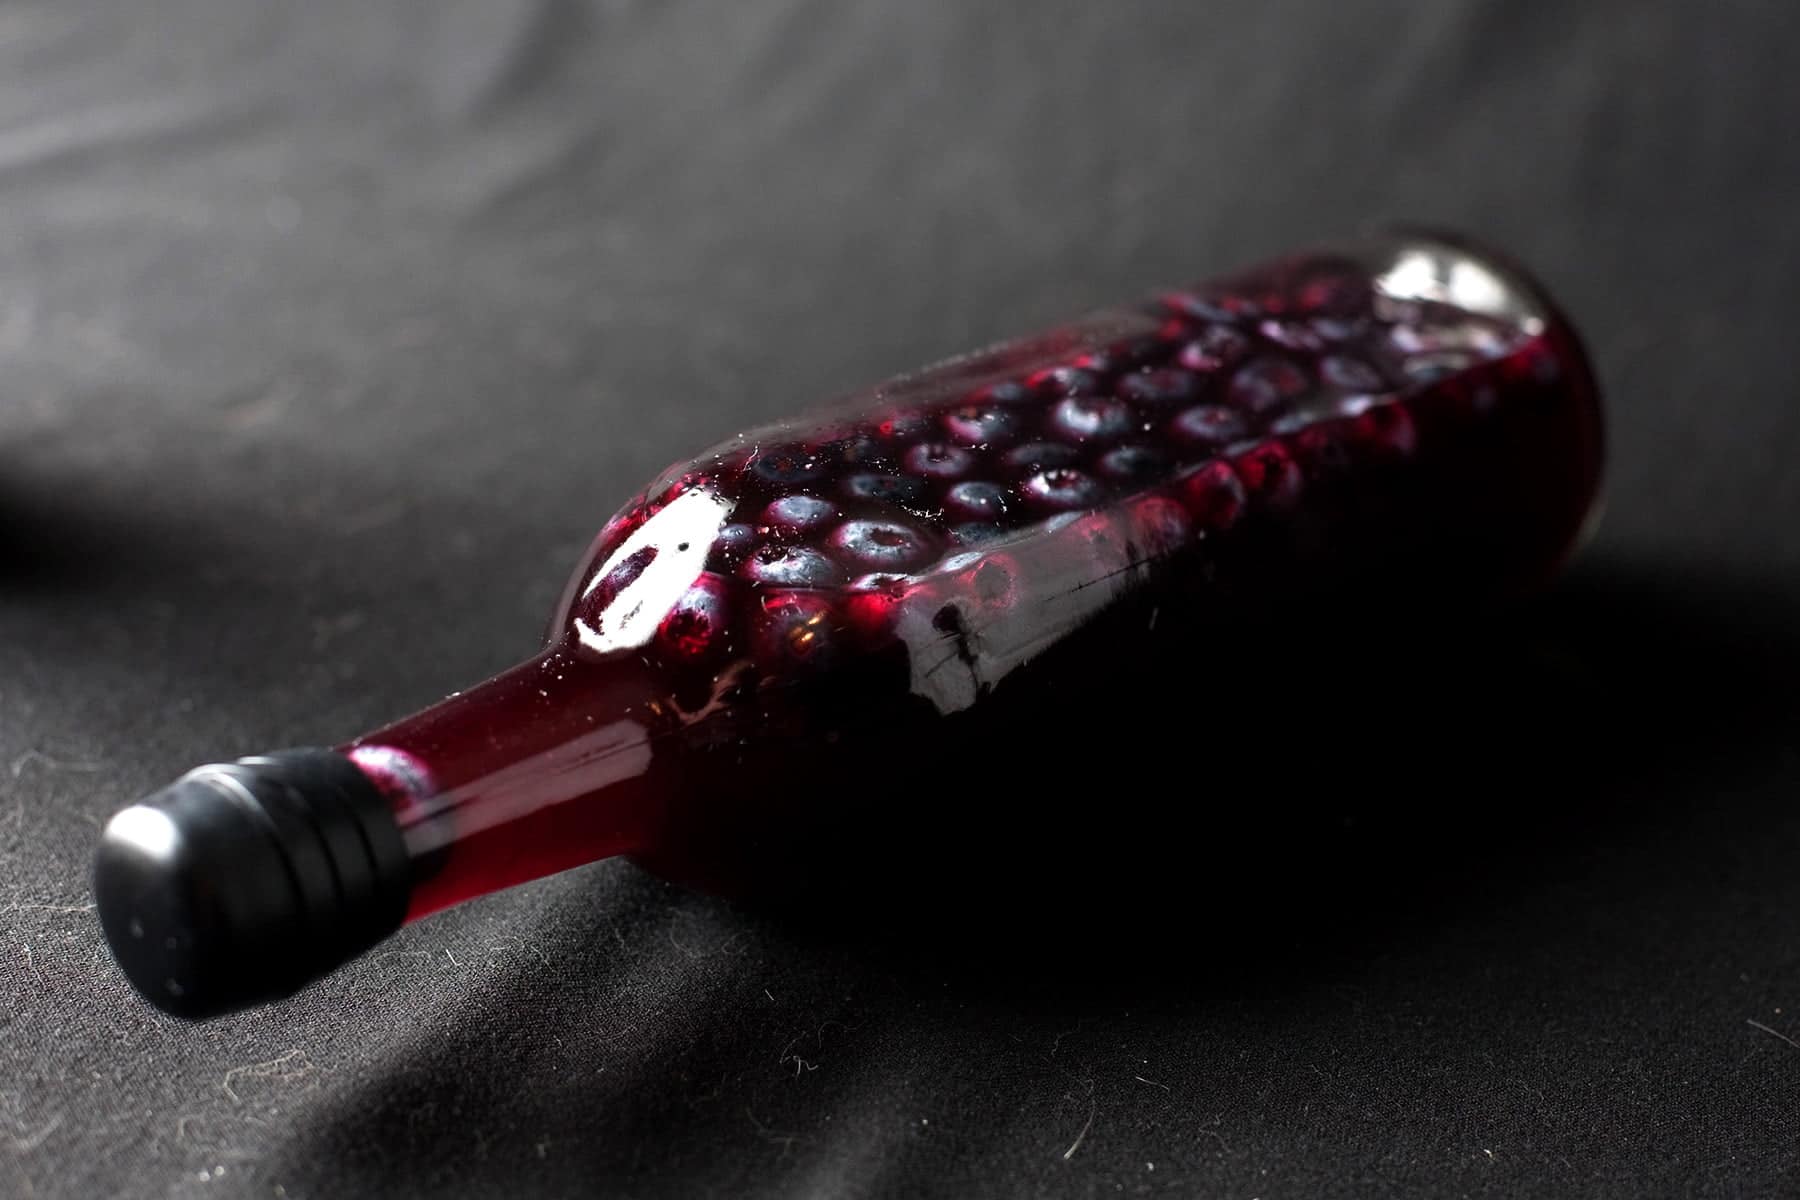 A wine bottled filled with dark purple liqueur and floating blueberries is pictured.